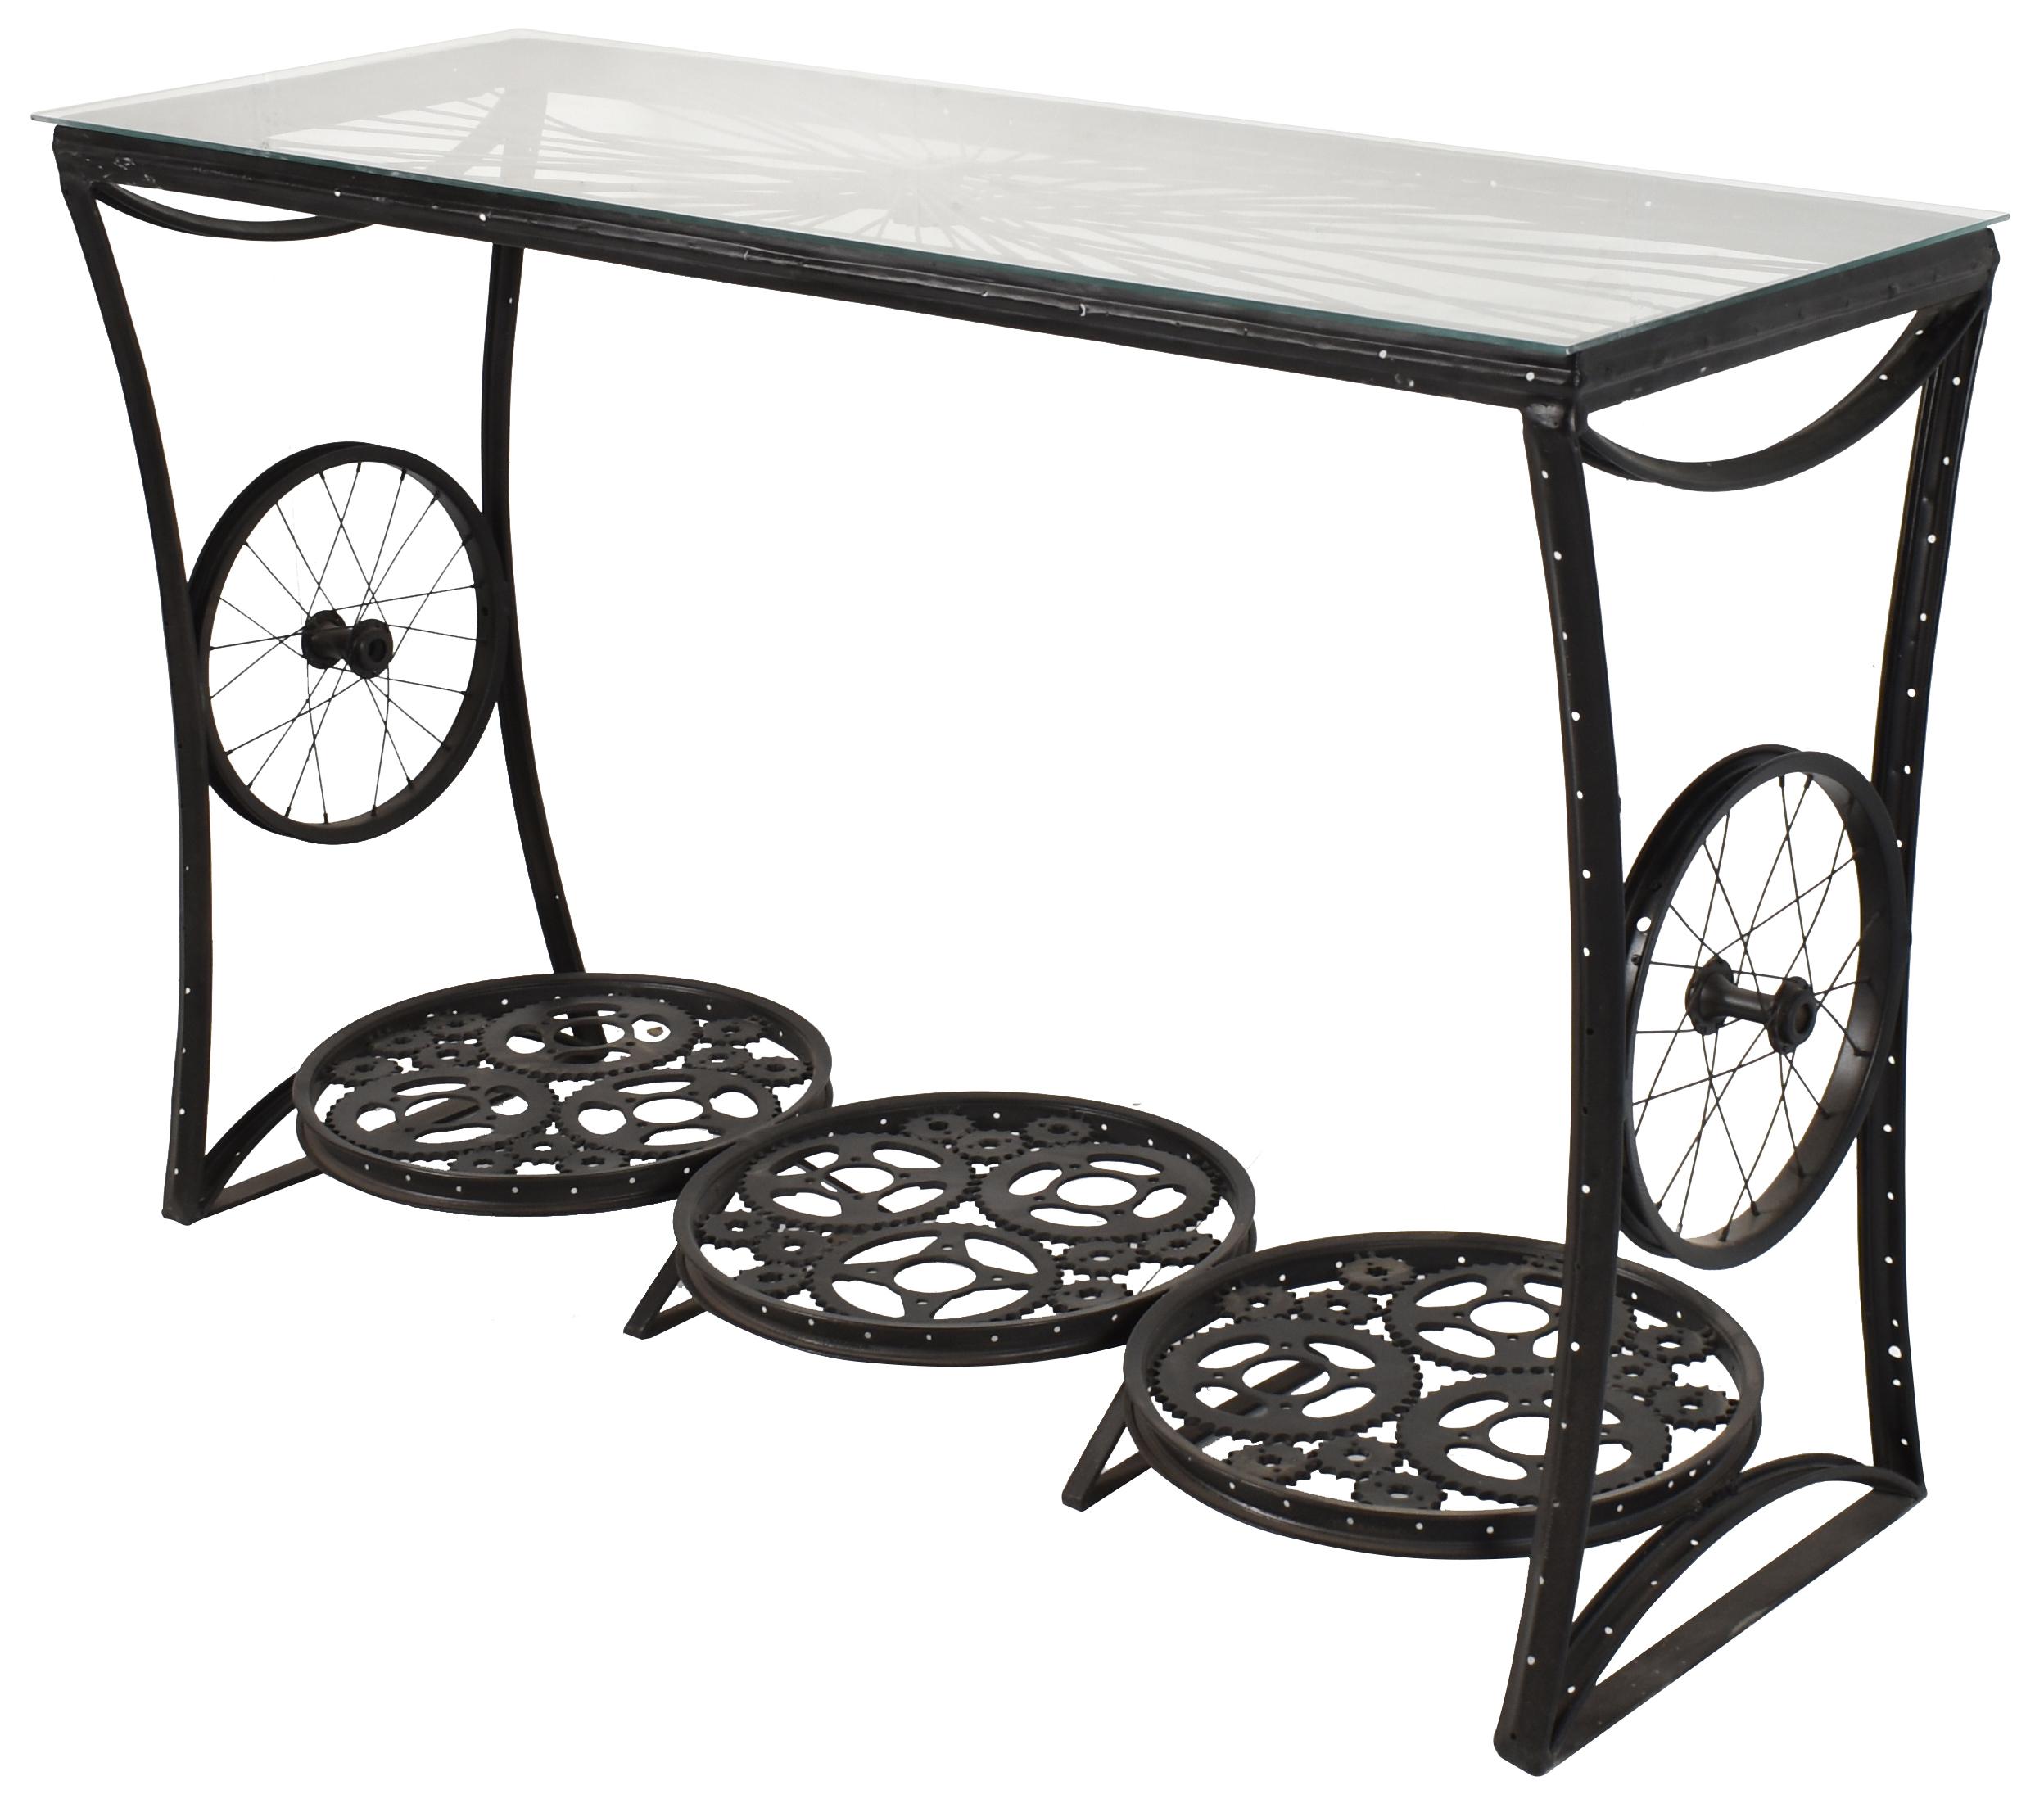 Urban Console Table WOW-1003 WOW-1003 in Black 